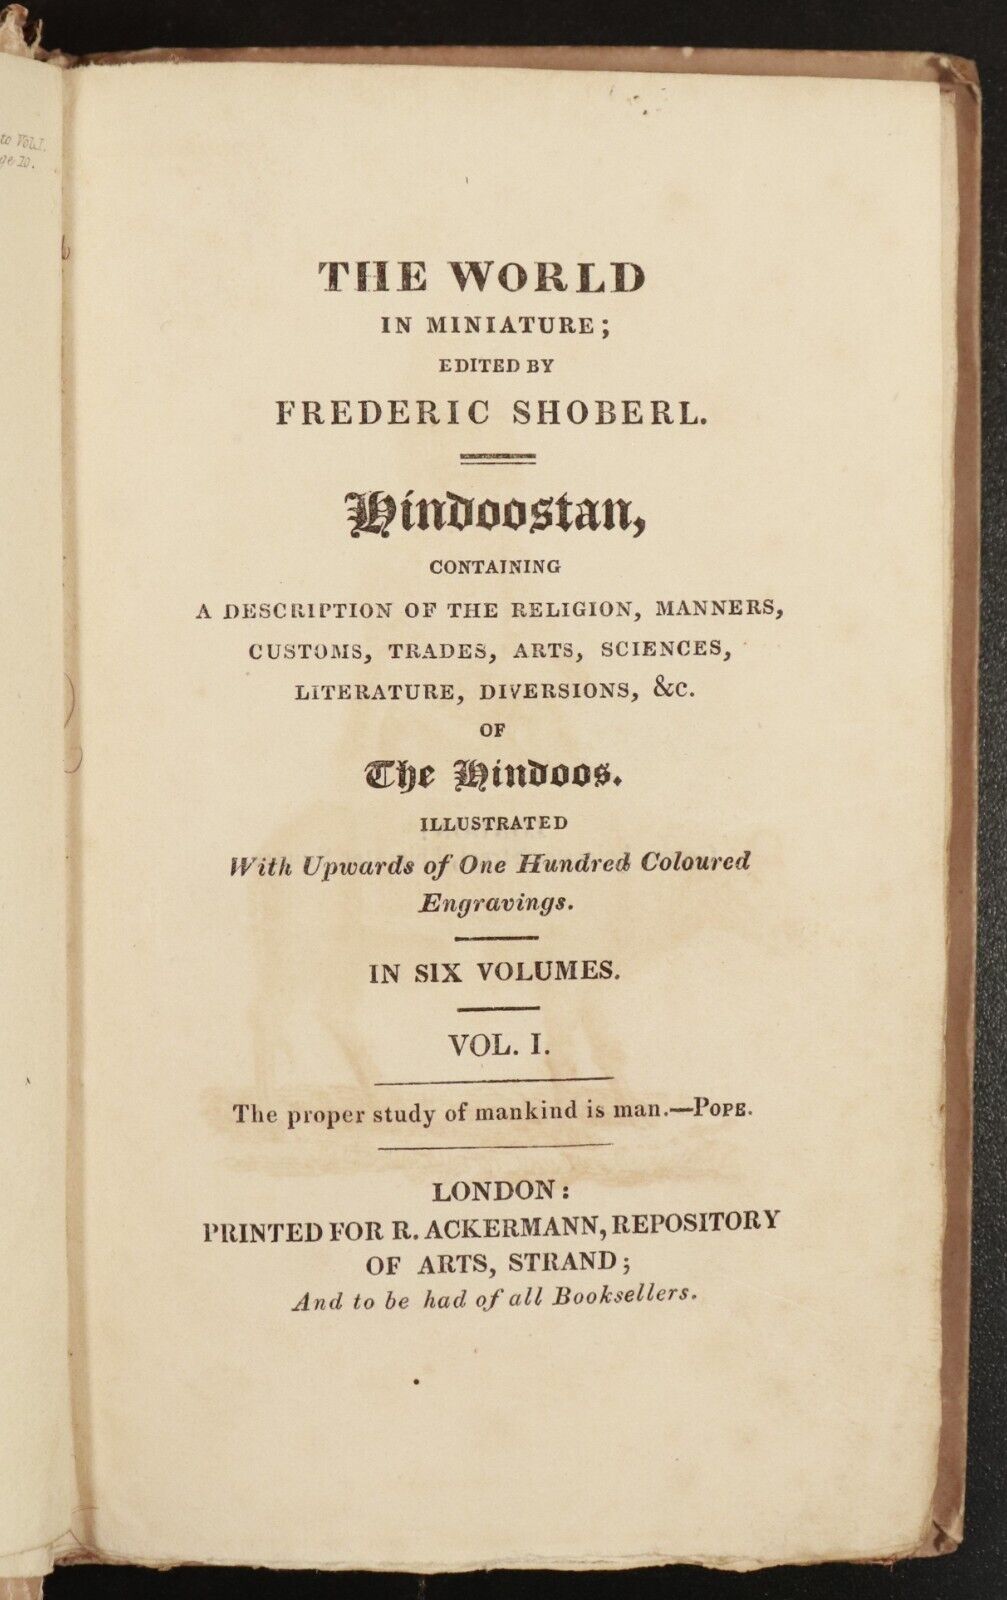 1822 4vol The World In Miniature: Hindoostan by F. Shoberl - Antiquarian Books